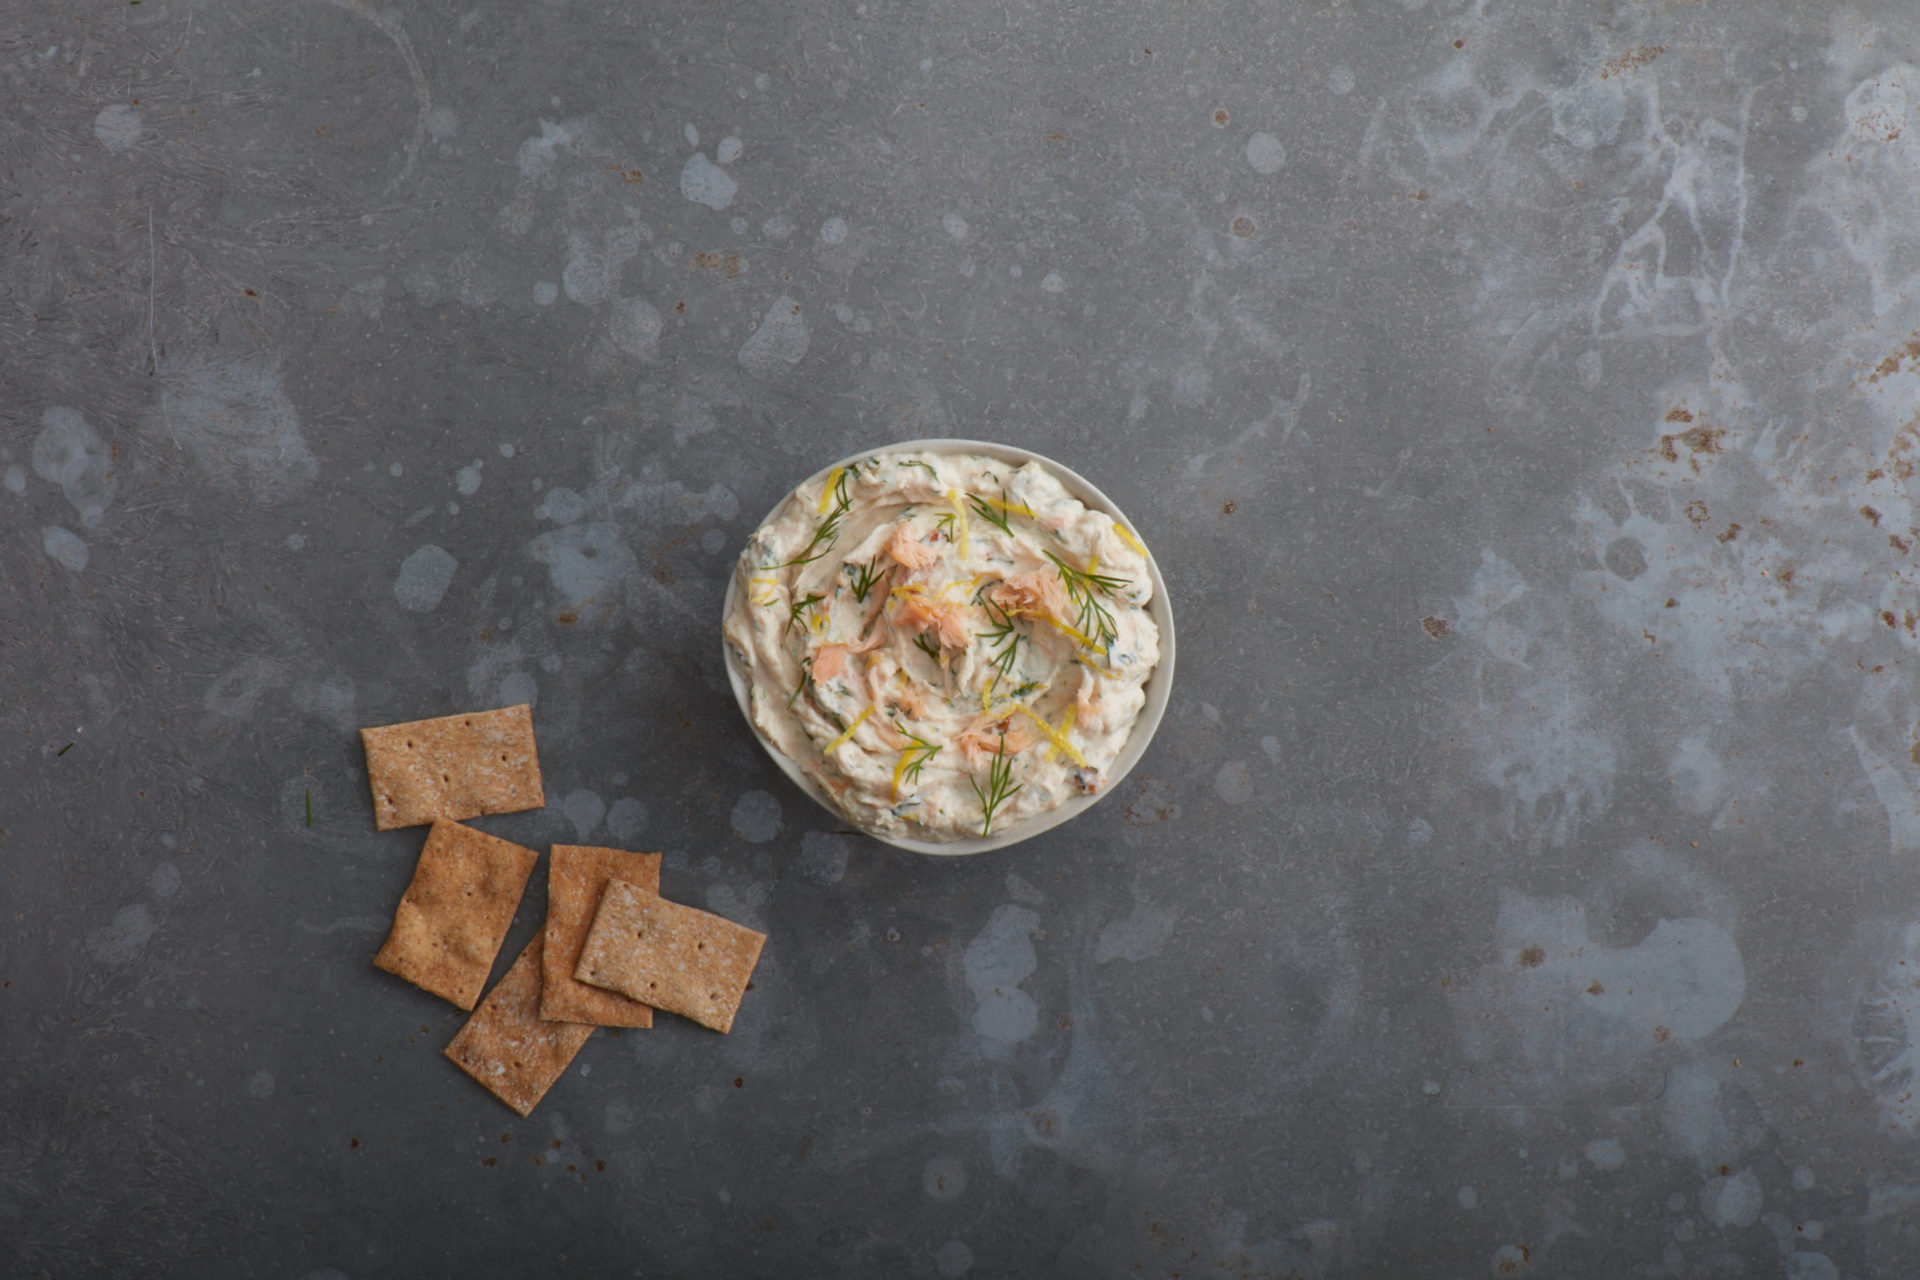 Salmon and dill dip